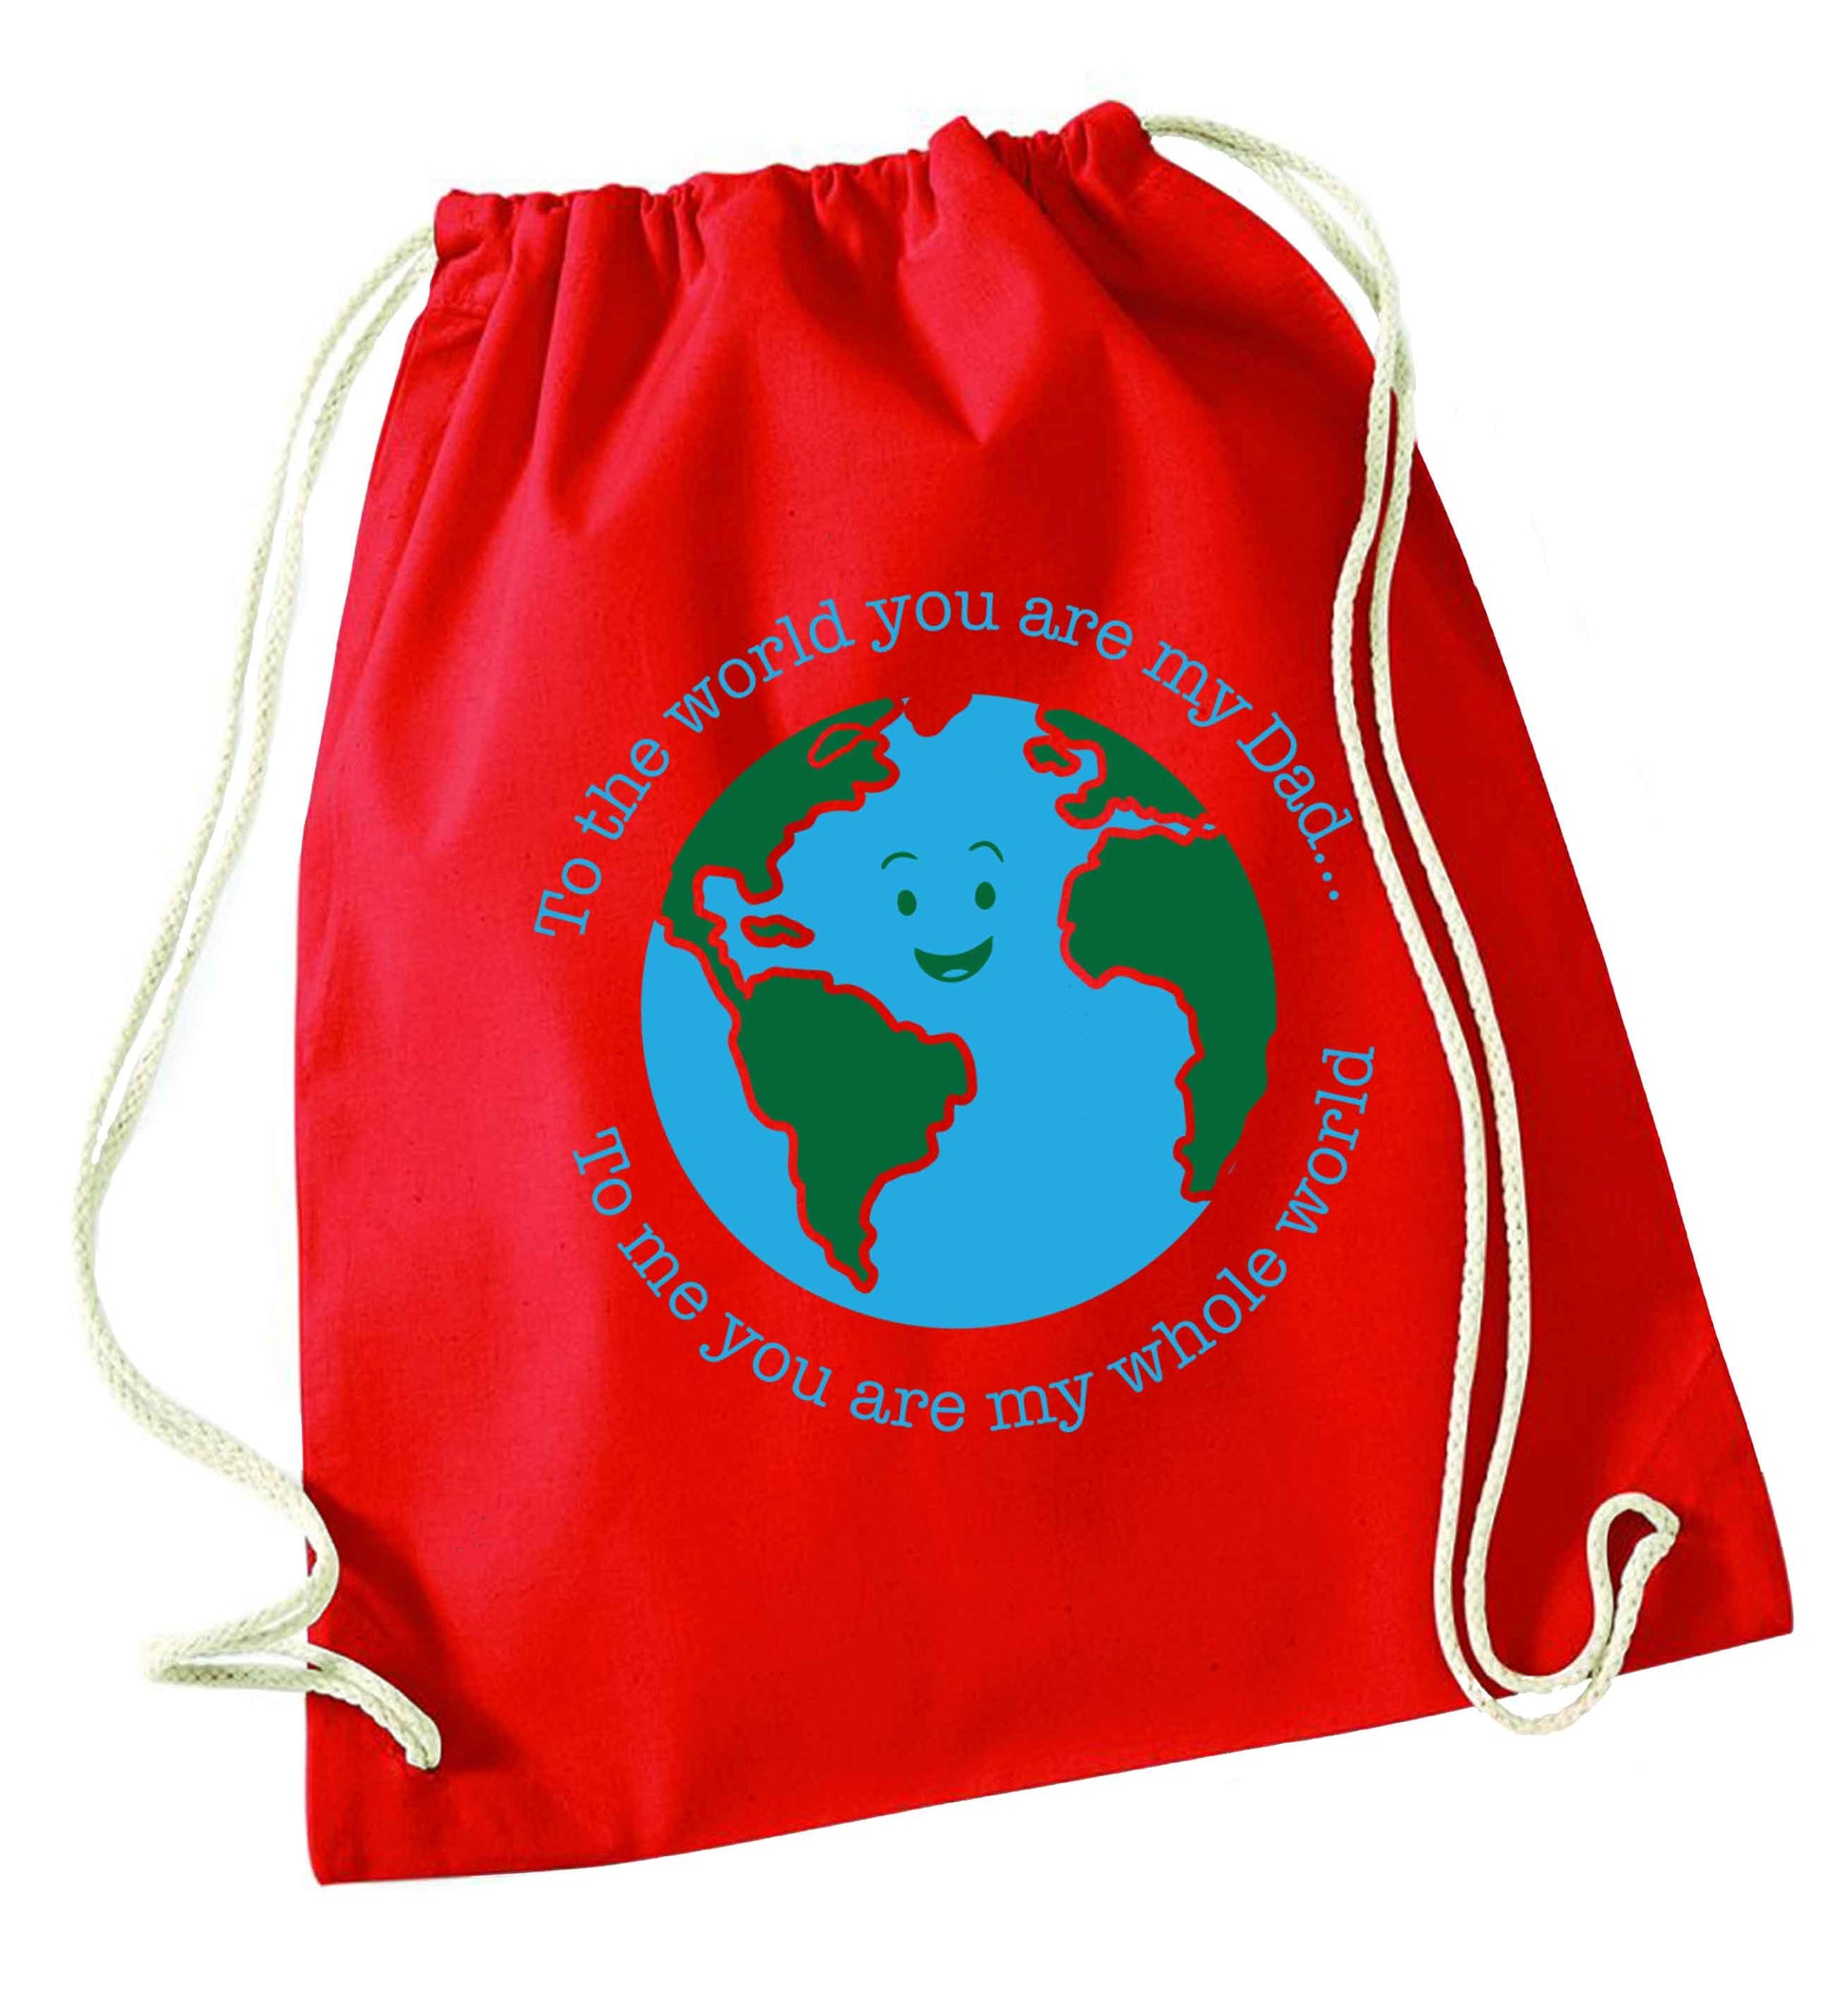 To the world you are my dad, to me you are my whole world red drawstring bag 